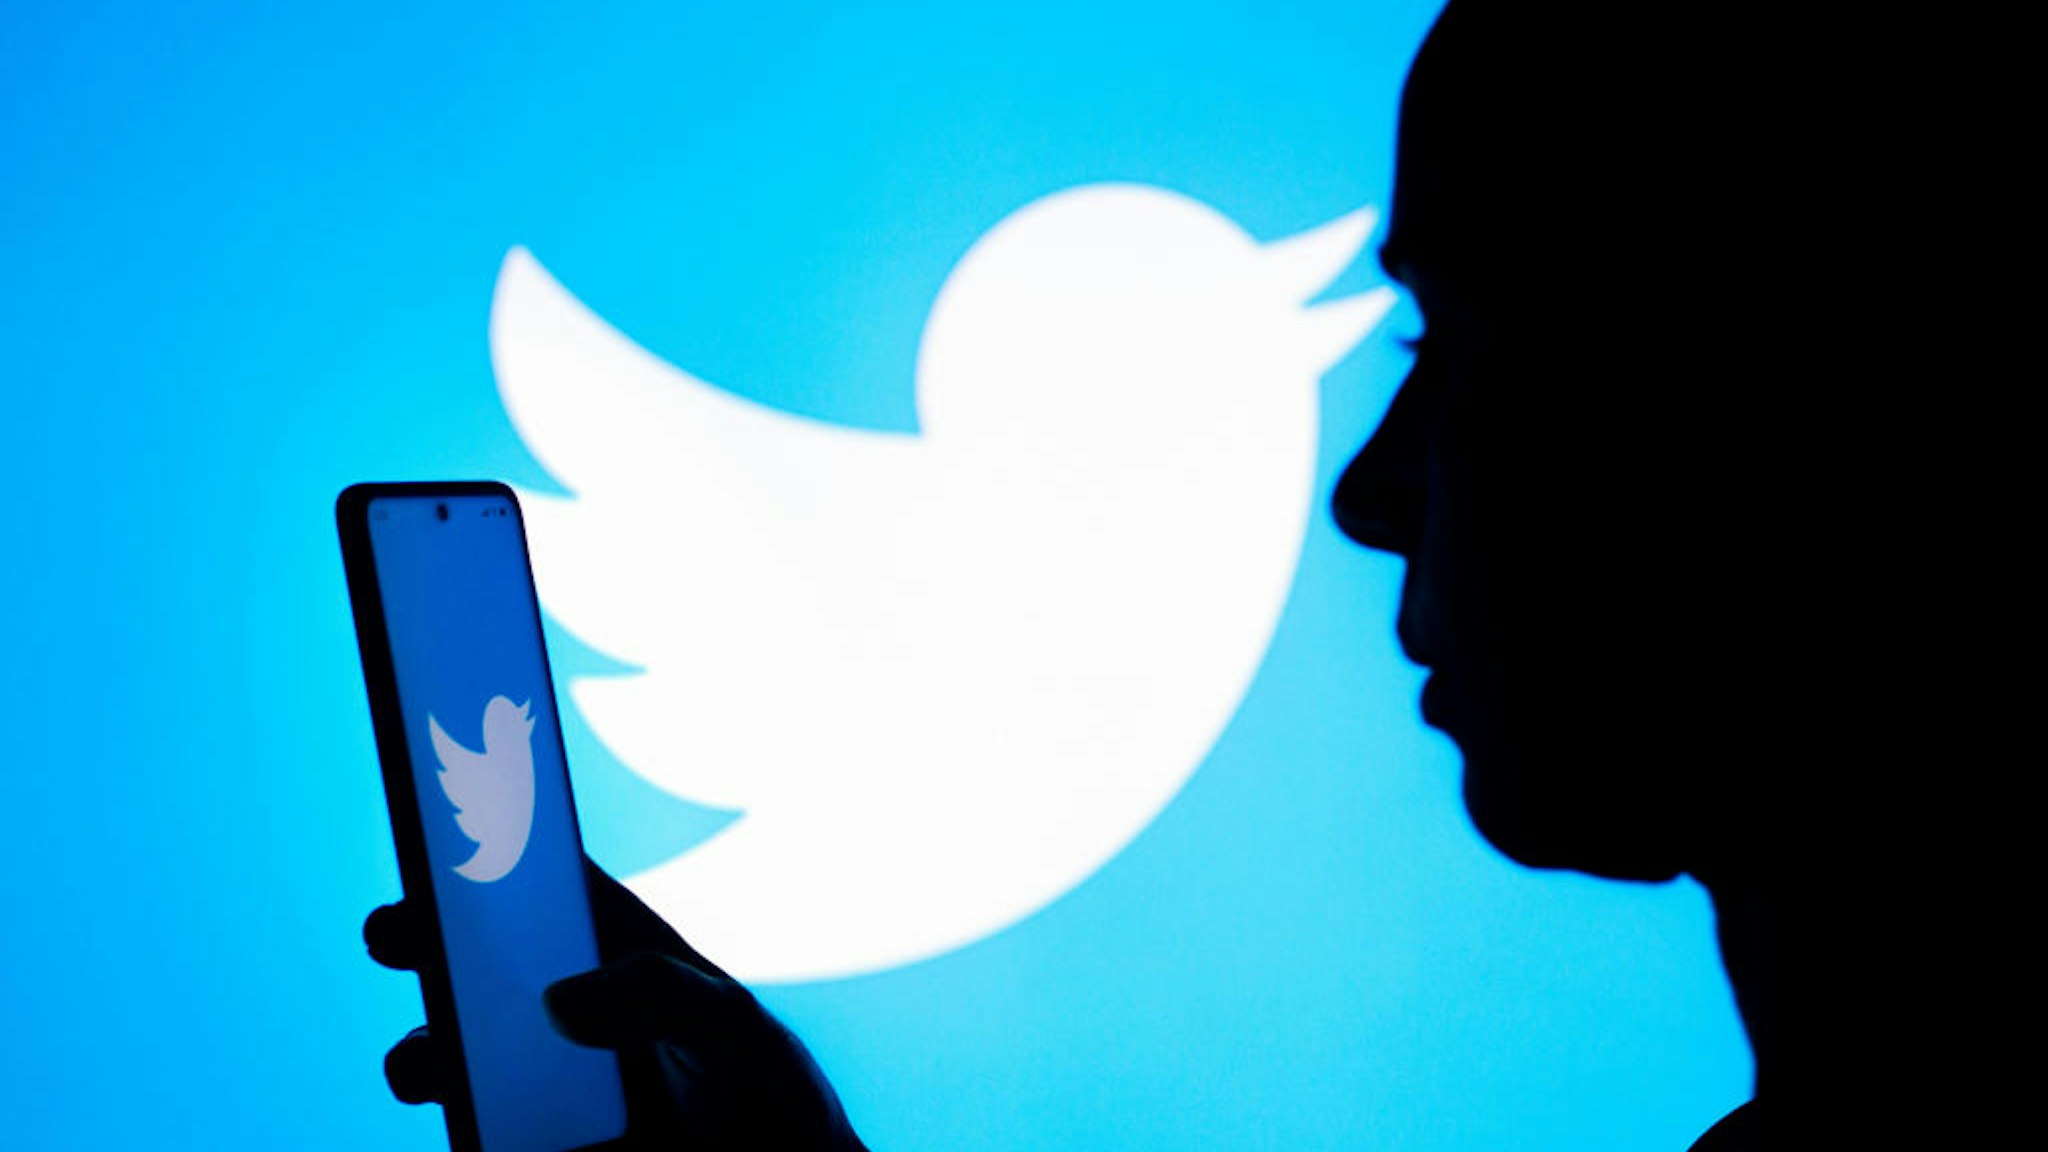 BRAZIL - 2022/03/21: In this photo illustration, a woman's silhouette holds a smartphone with the Twitter logo displayed on the screen and in the background. (Photo Illustration by Rafael Henrique/SOPA Images/LightRocket via Getty Images)